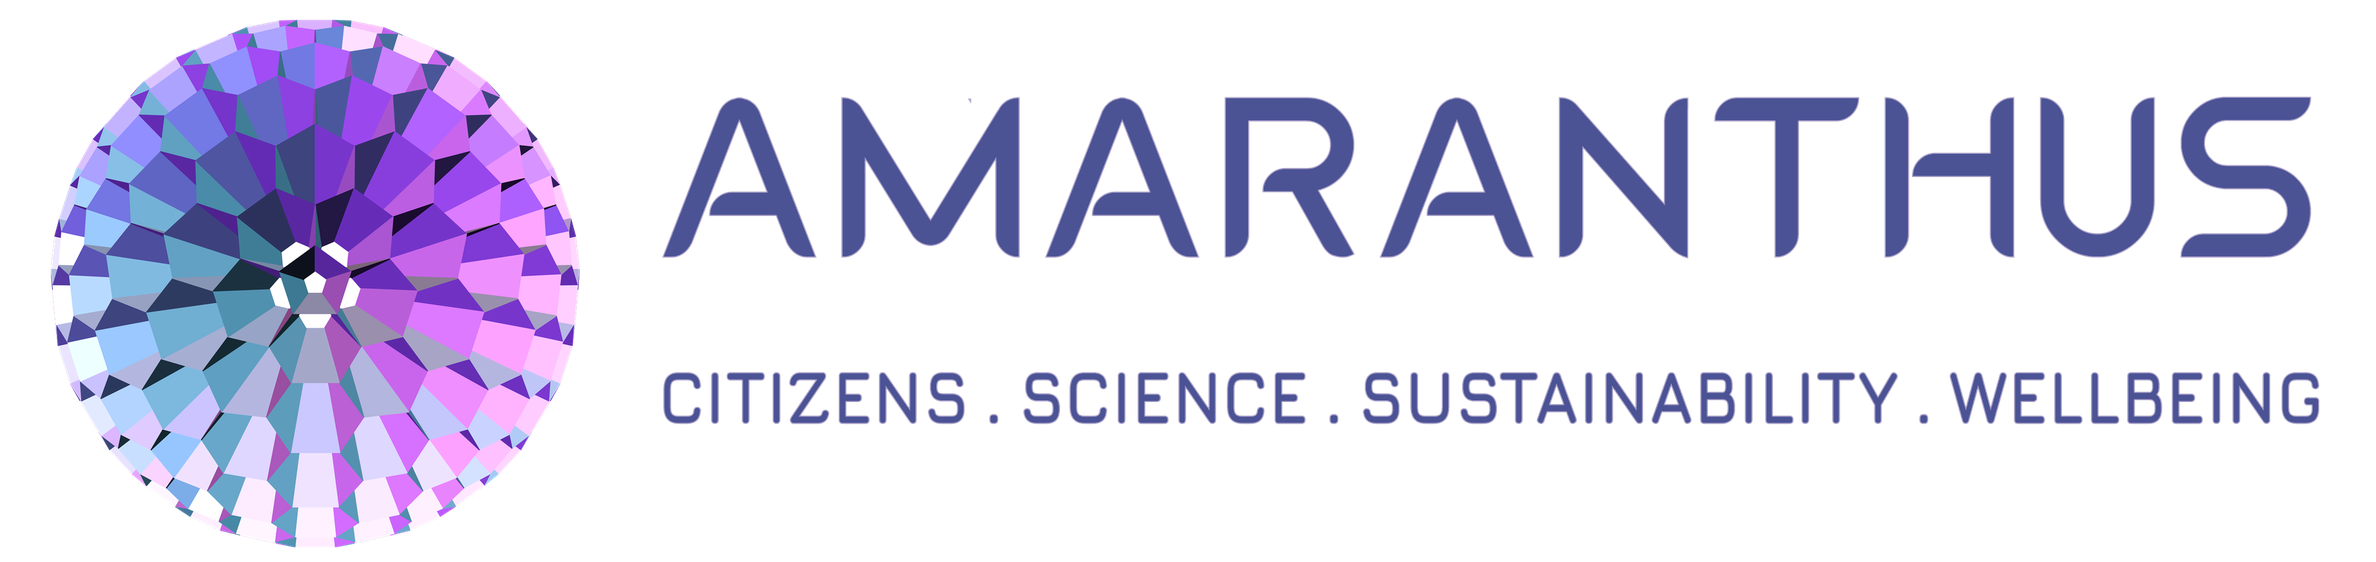 Sustainability Research and Modeling Solutions | Amaranthus